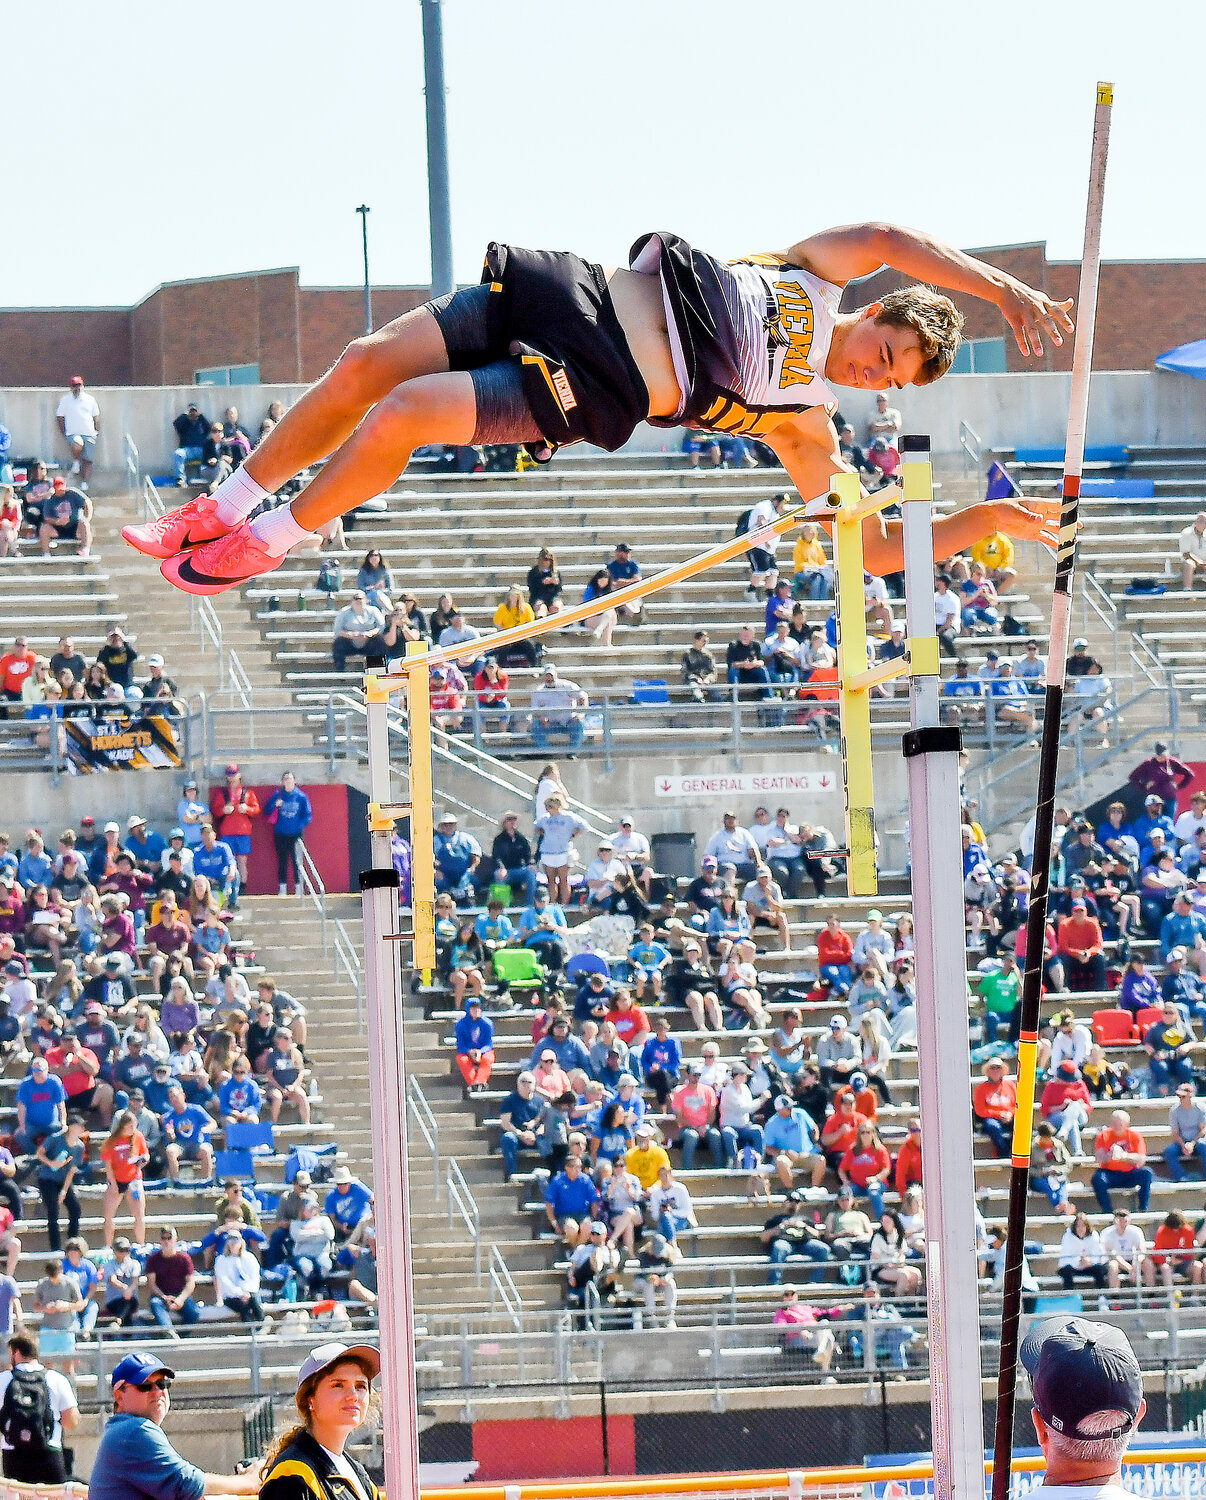 Gavin Schwartze also earned All-State honors in the Class 1 Boys Pole Vault placing sixth during the Missouri State High School Activities Association (MSHSAA) Class 1-2 State Track and Field Championships held over the weekend at Jefferson City High School’s Adkins Stadium.